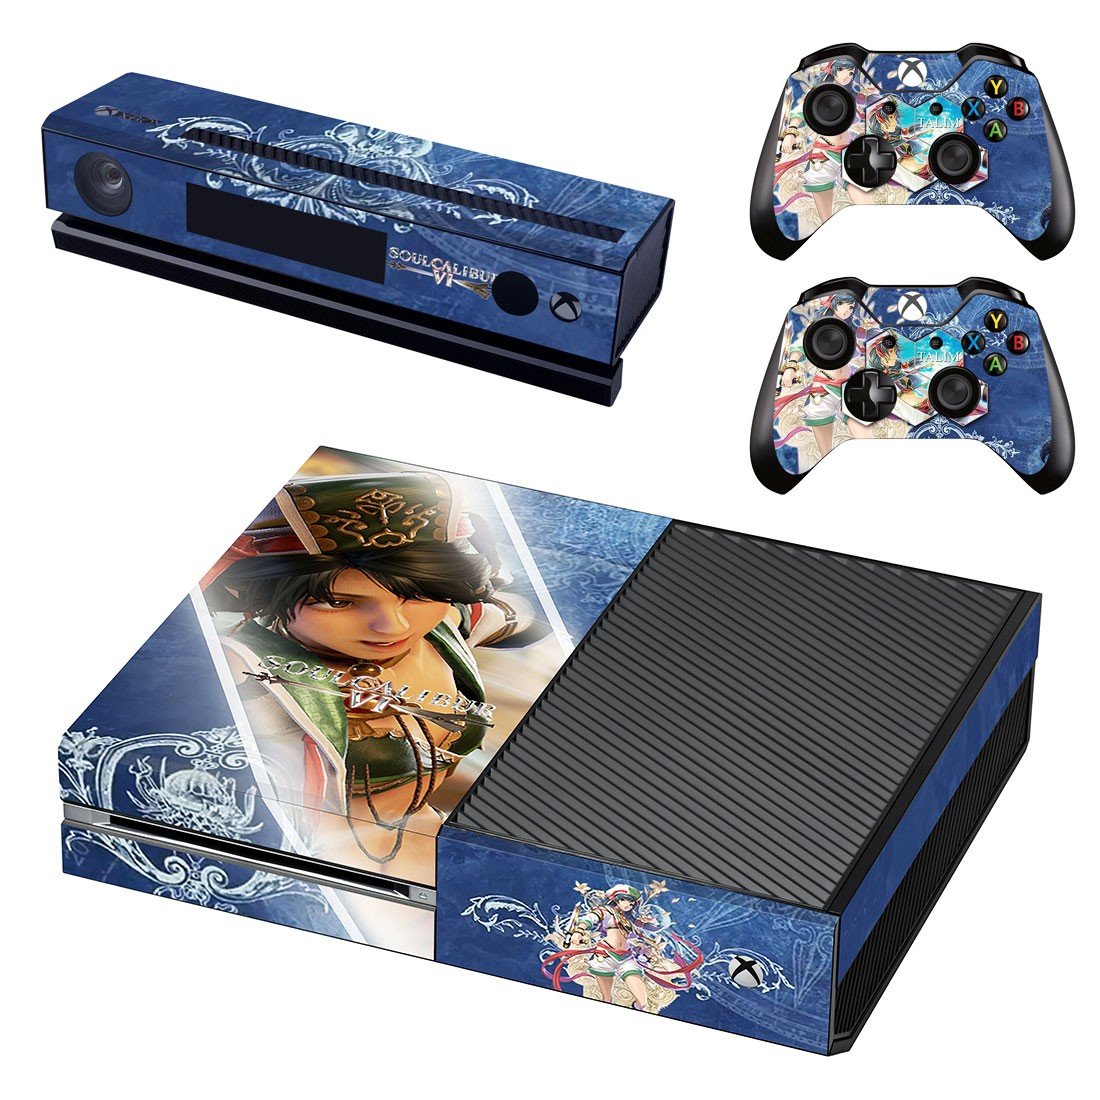 Xbox One And Controllers Skin Sticker - Soulcalibur 6